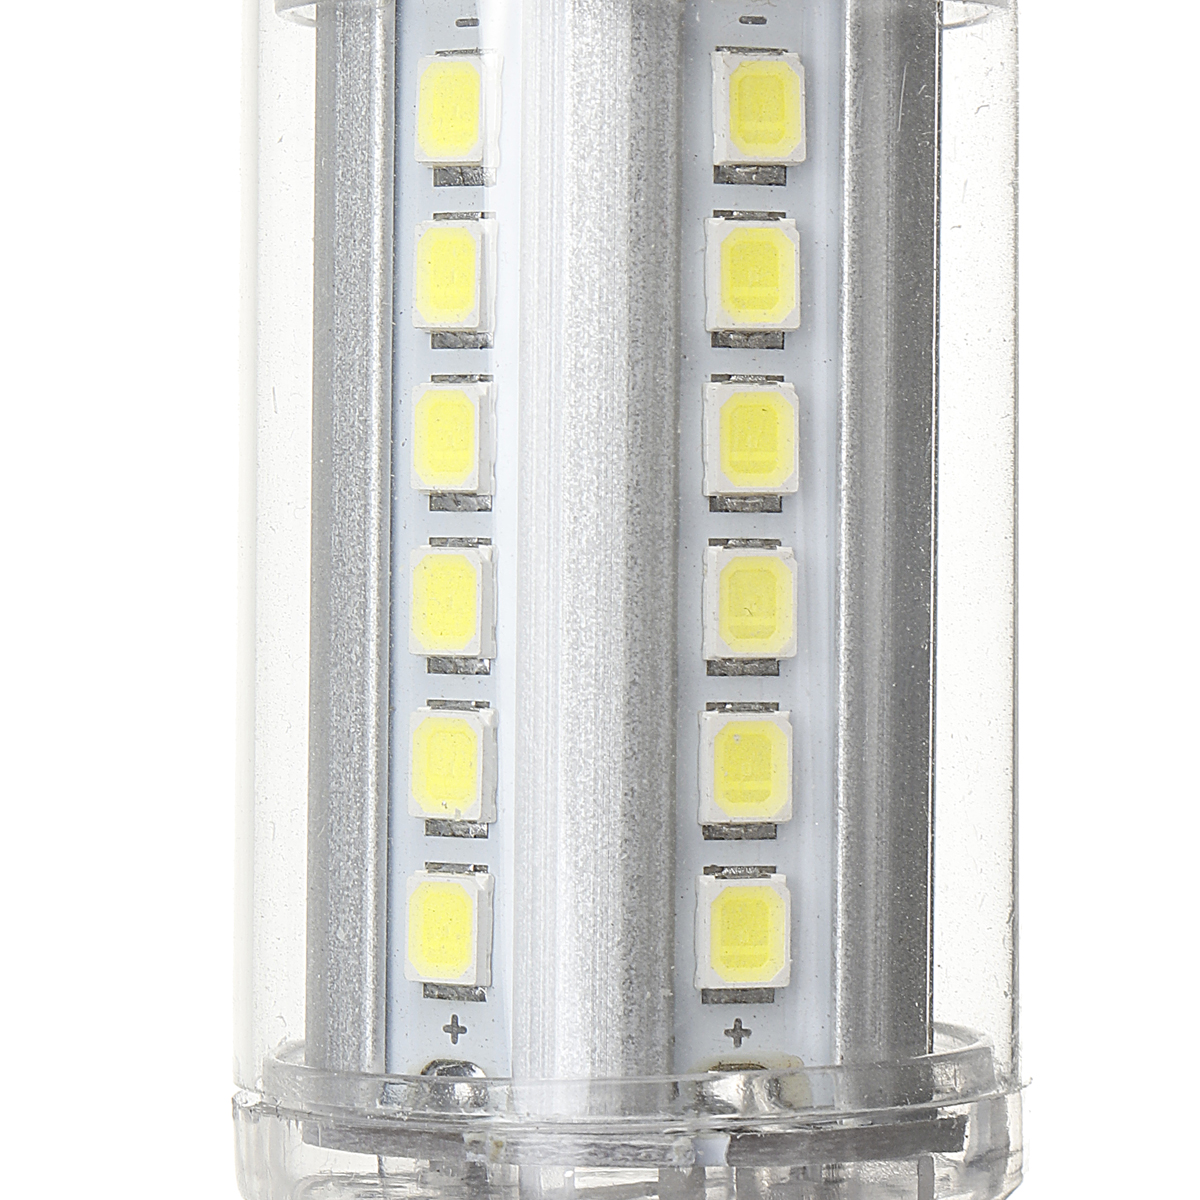 Dimmable-5W-10W-12W-15W-R7S-LED-Corn-Bulb-2835-SMD-Floodlight-Replace-Halogen-Lamp-Indoor-Home-Light-1728600-7